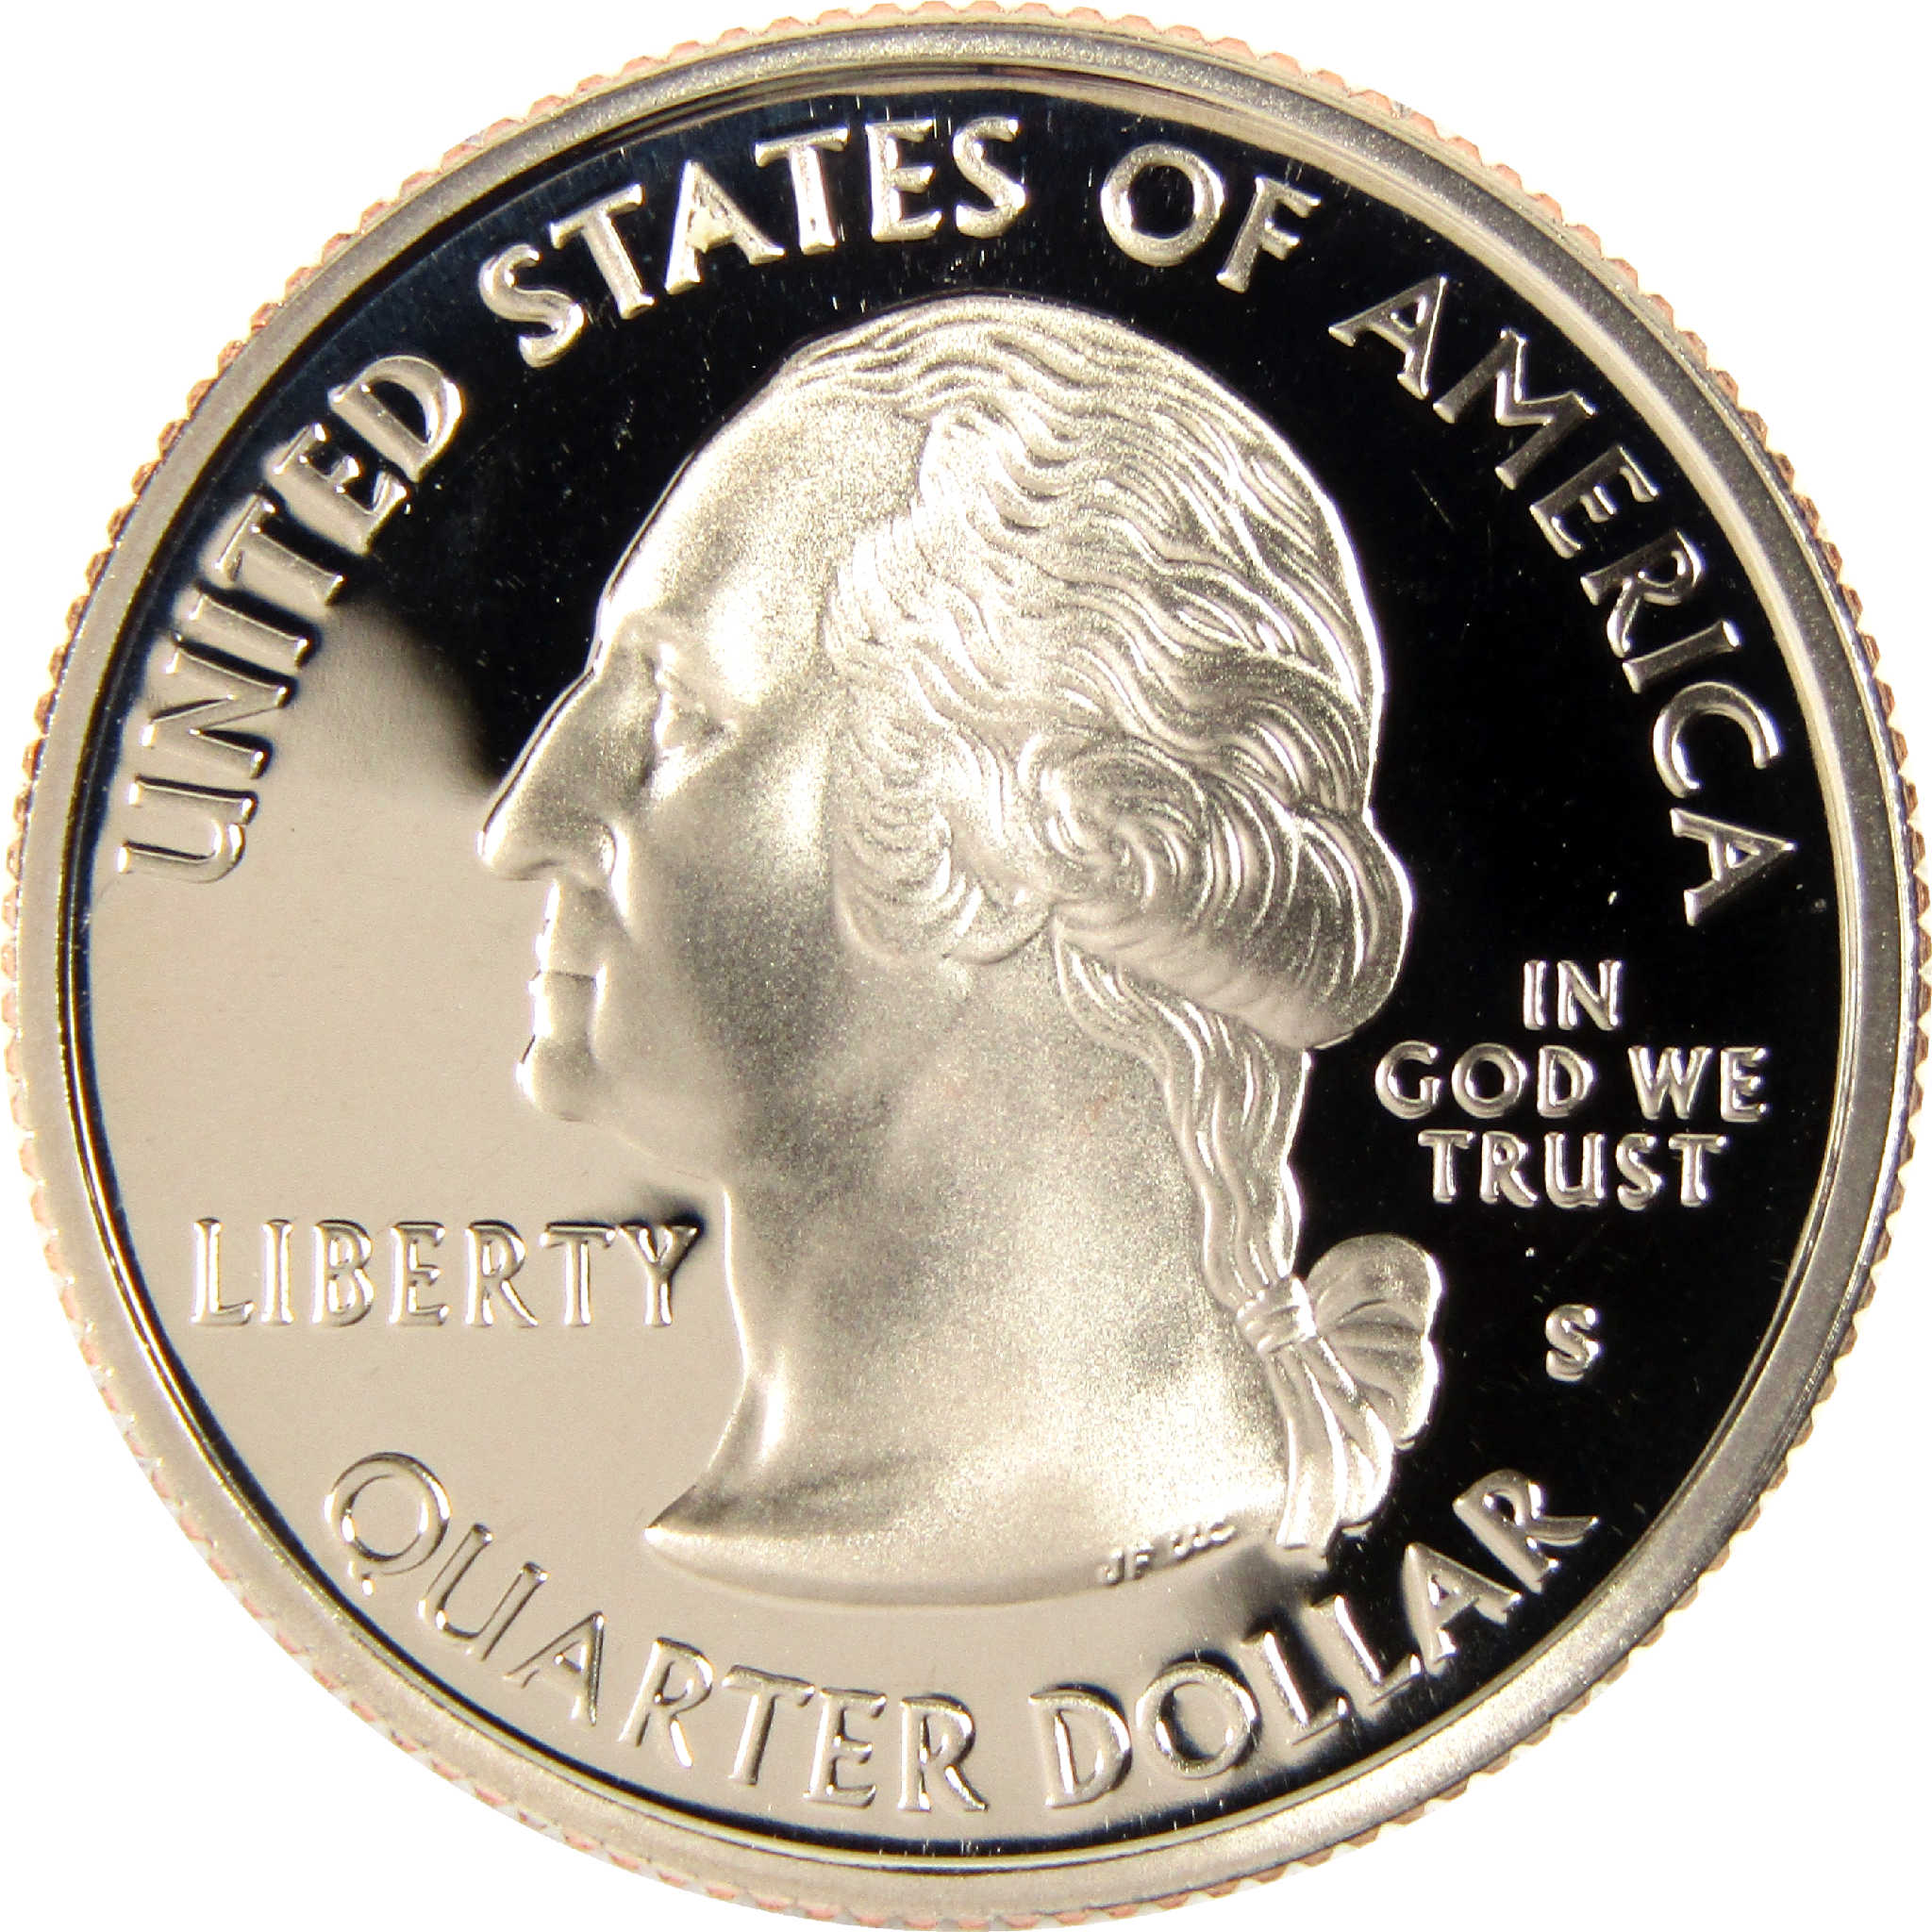 2005 S Kansas State Quarter Choice Proof Clad 25c Coin